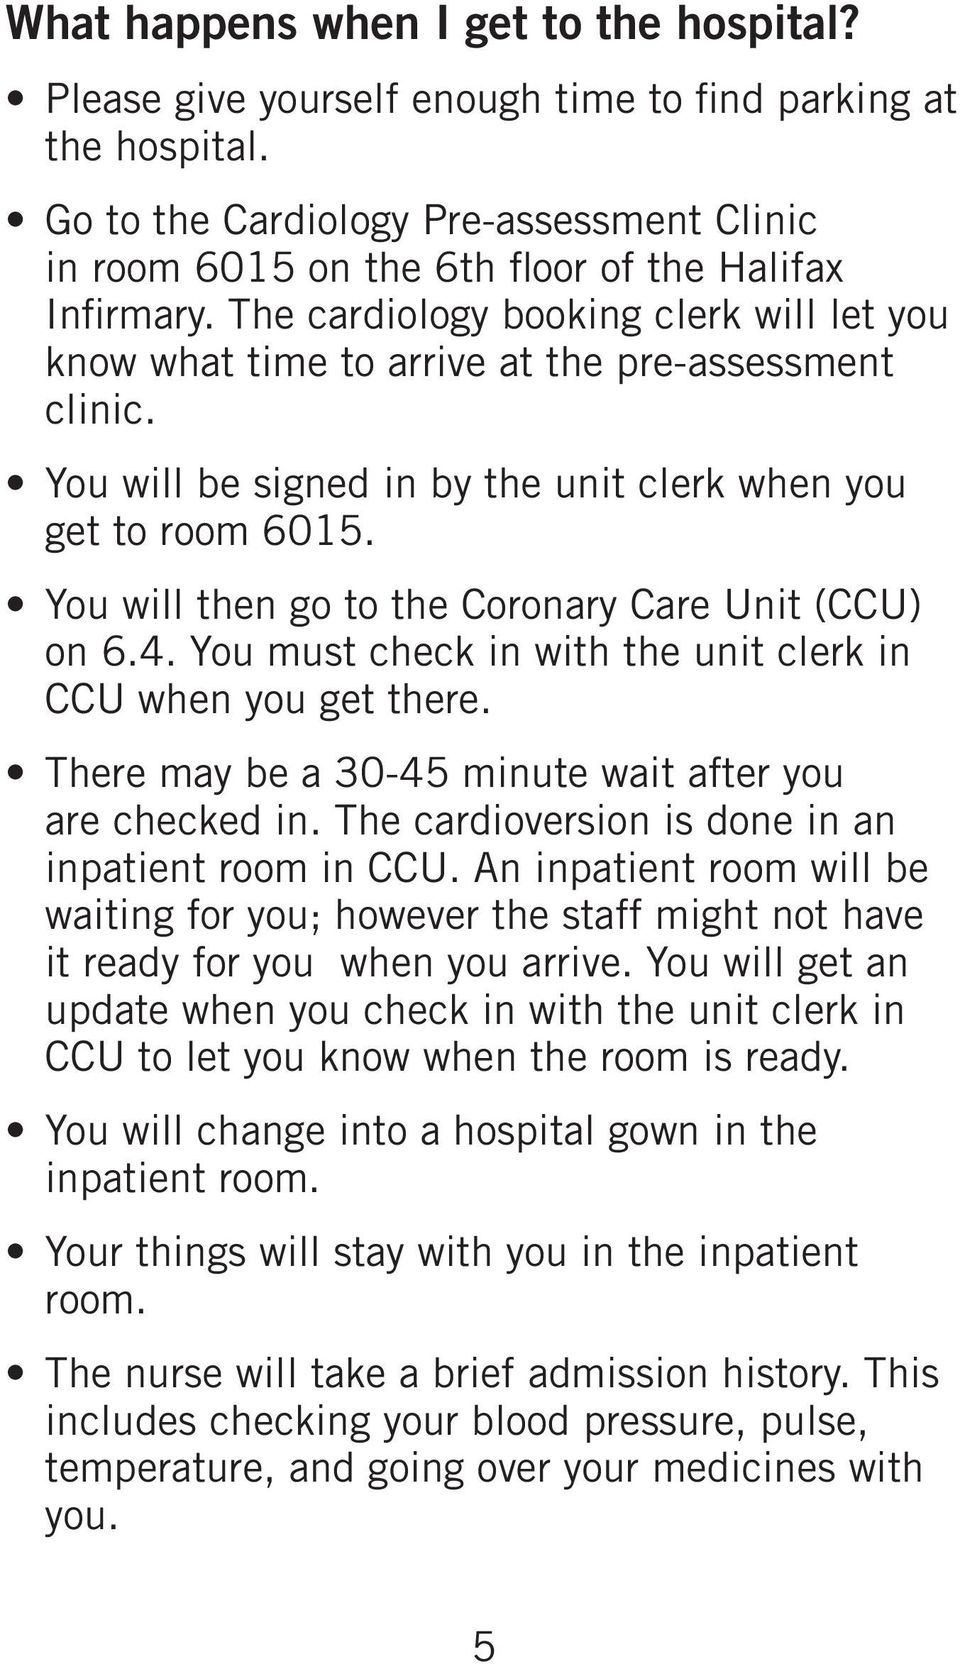 You will be signed in by the unit clerk when you get to room 6015. You will then go to the Coronary Care Unit (CCU) on 6.4. You must check in with the unit clerk in CCU when you get there.